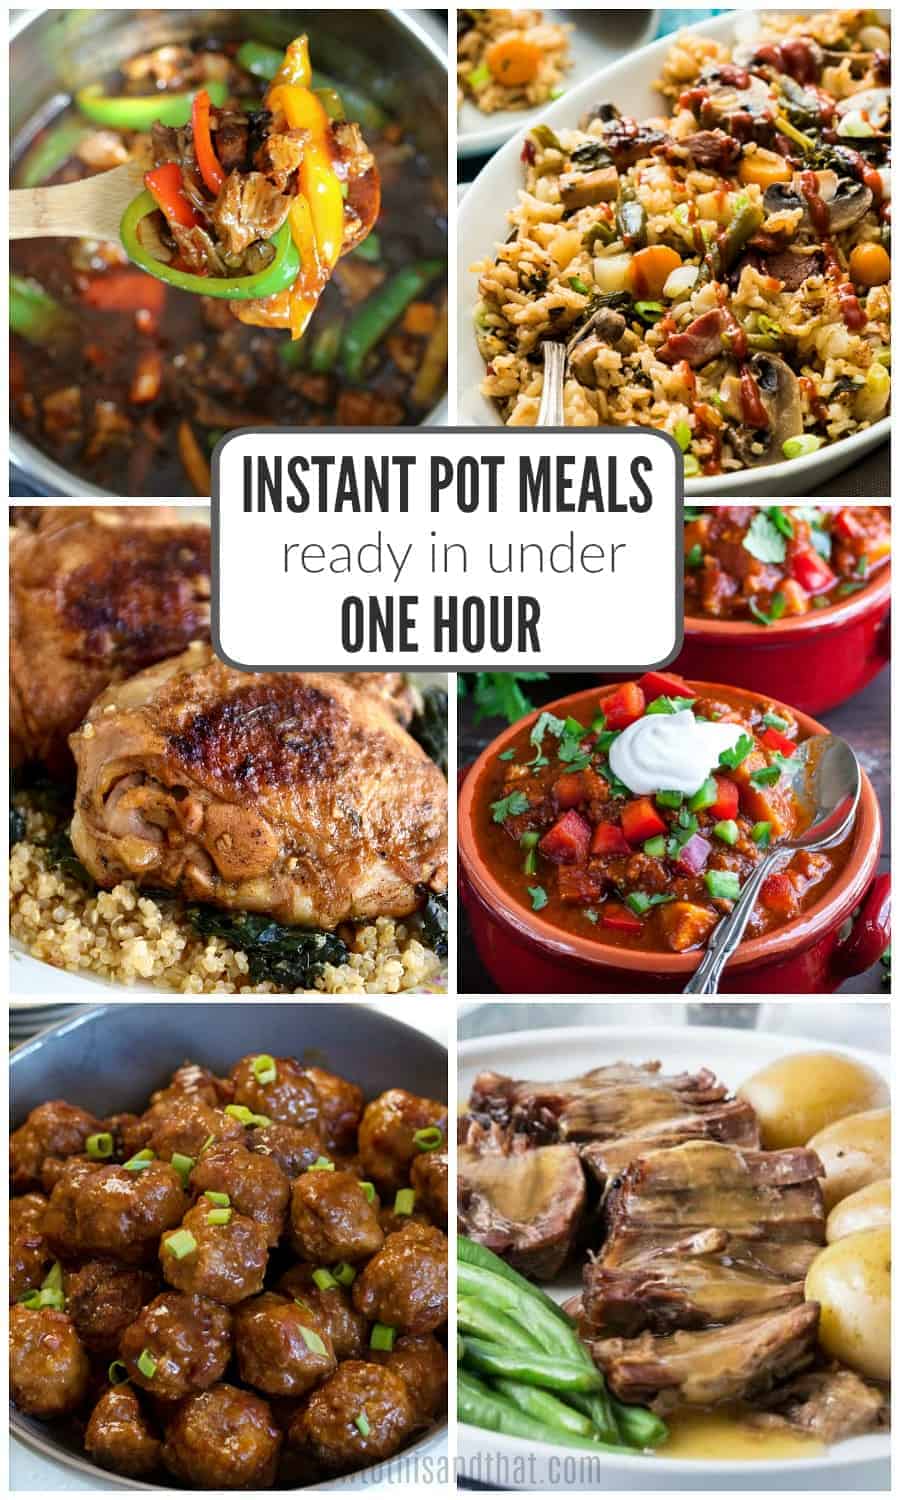 Instant Pot Recipes- Our Favorites Ready In Under 1 Hour